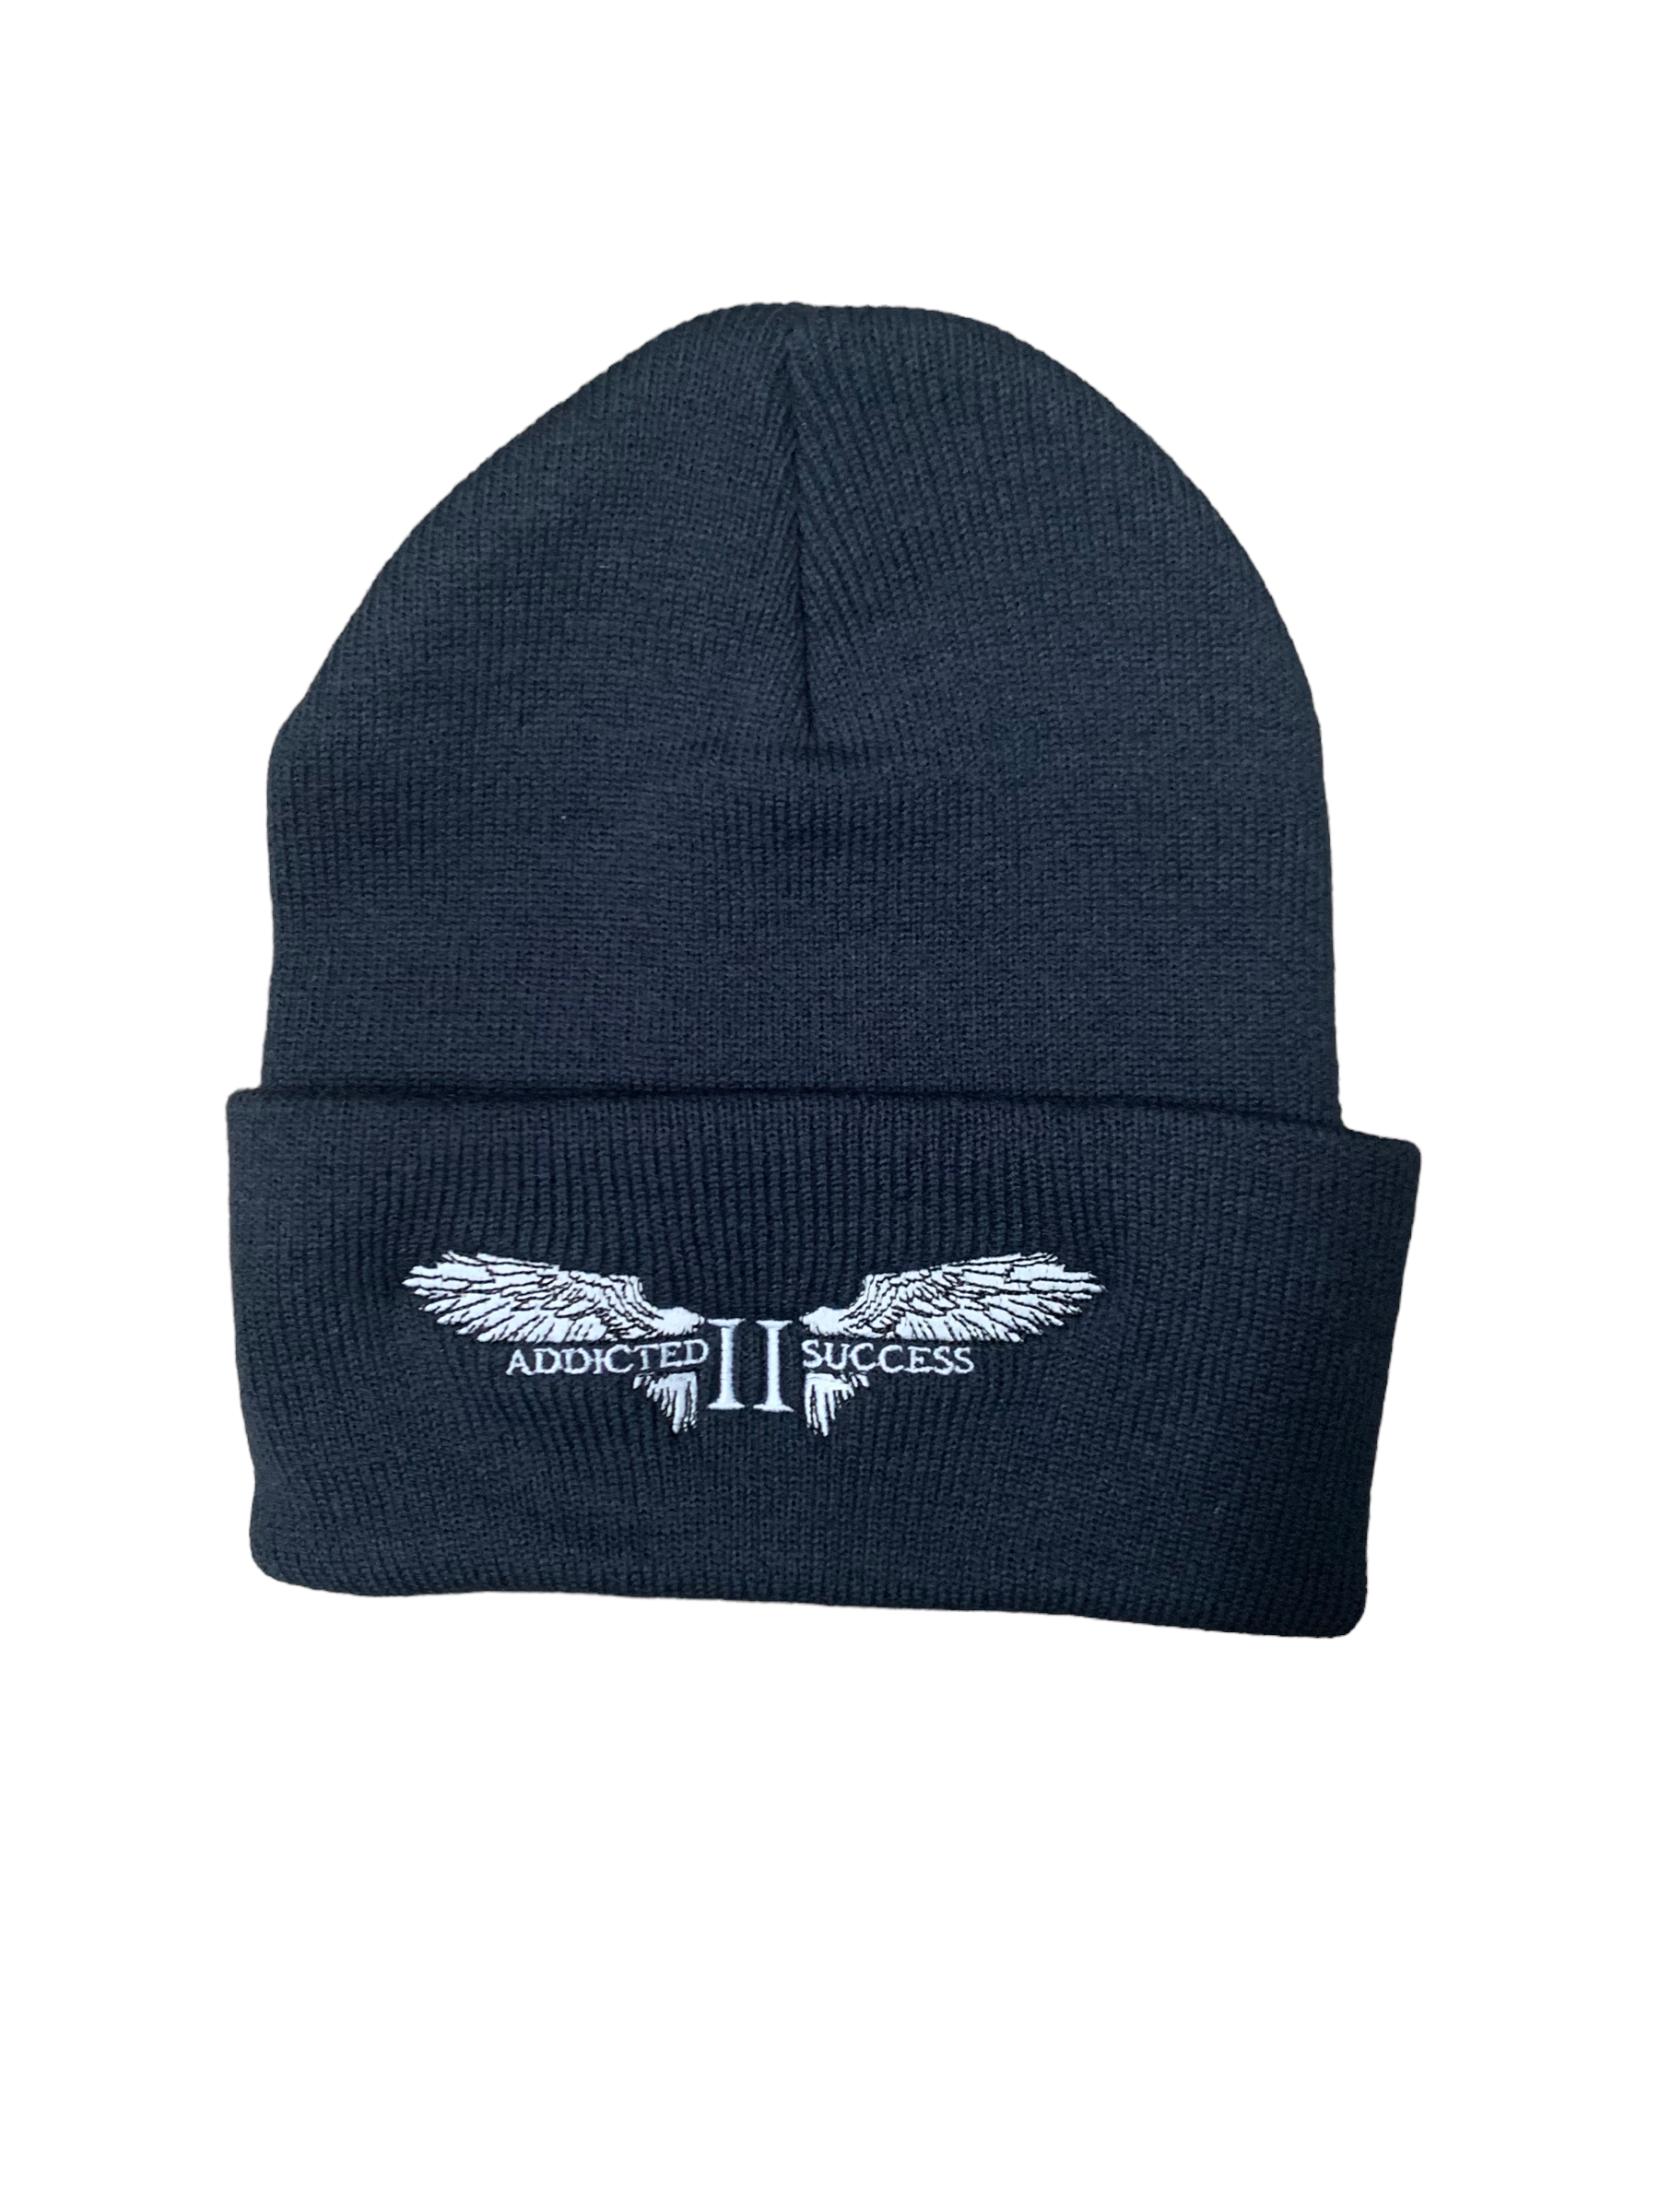 Navy Blue and White Embroidery Beanie